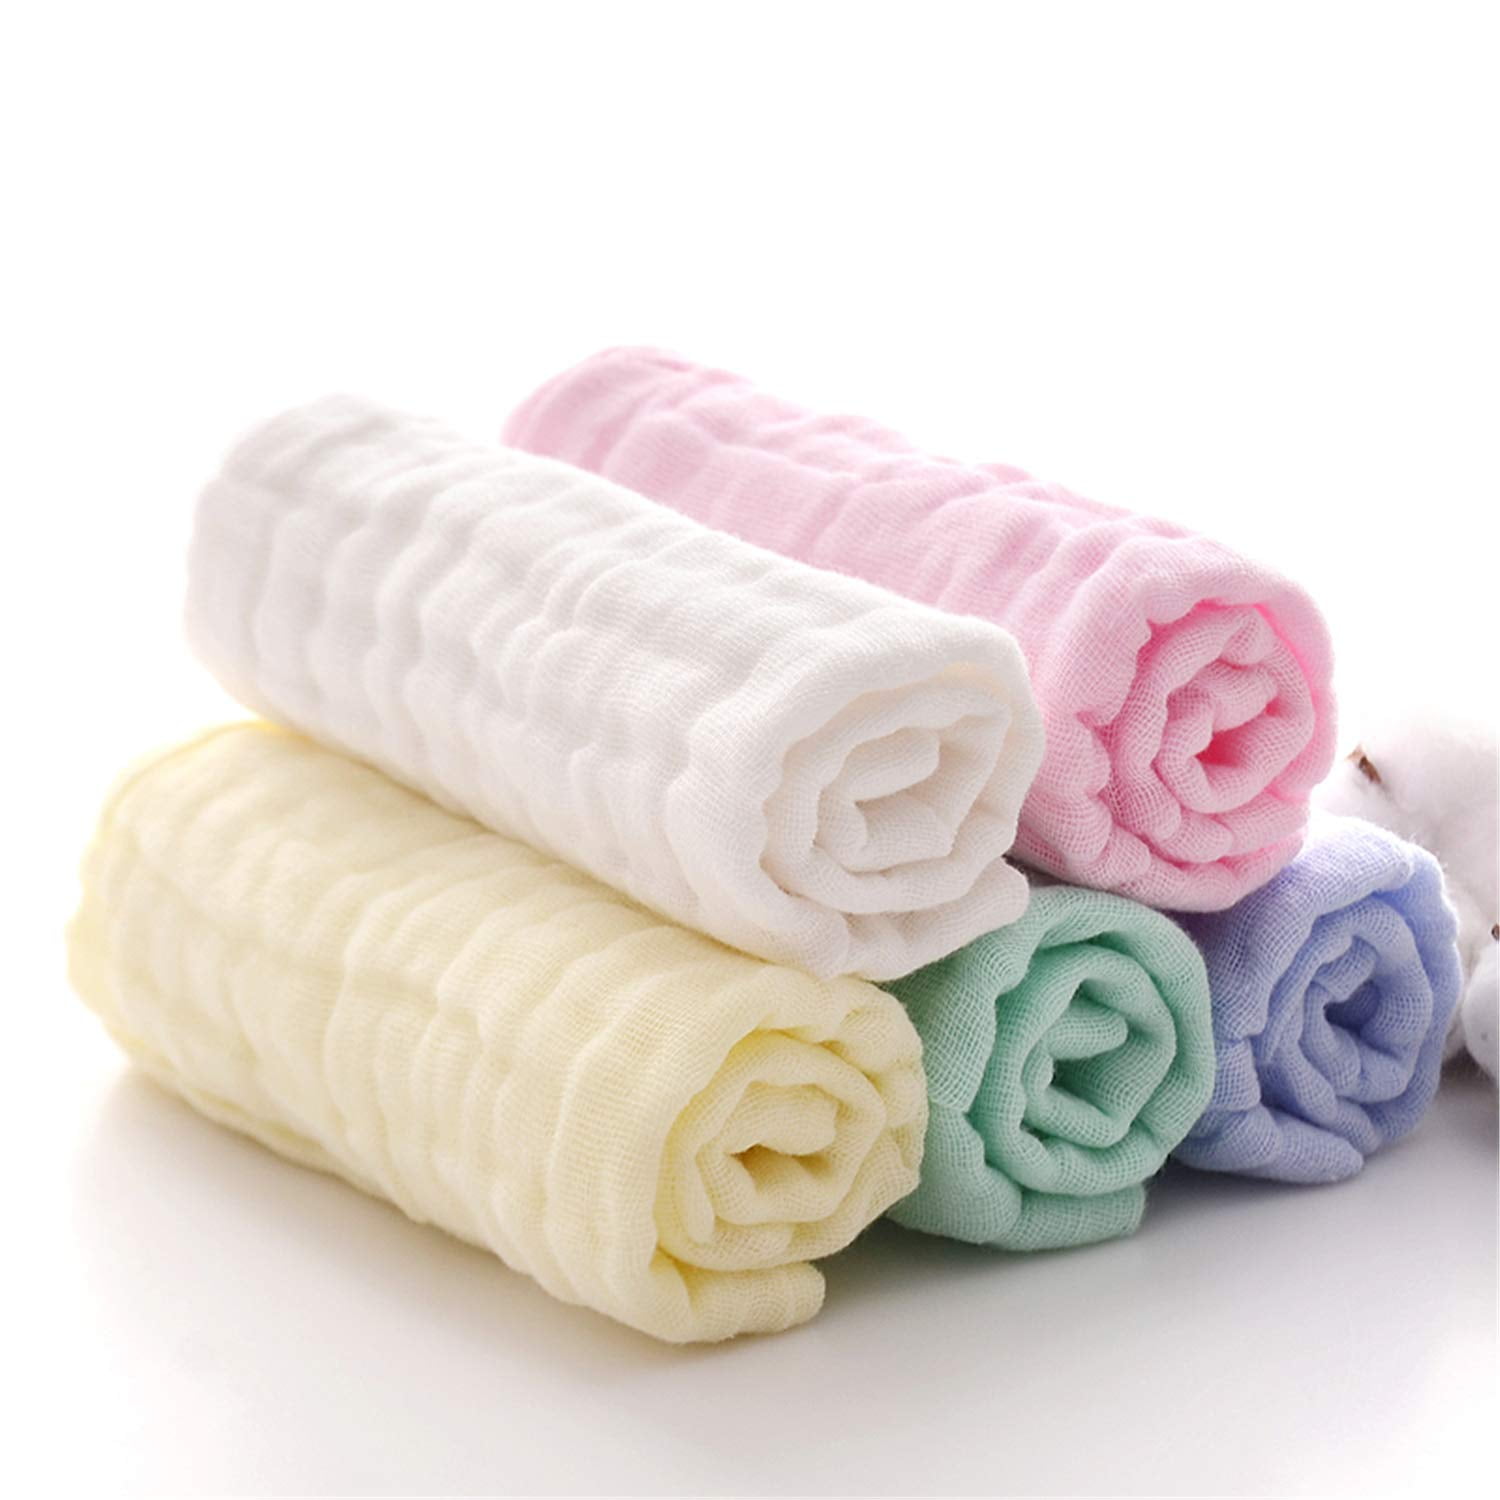 5 Pack 12x12 inches Natural Muslin Cotton Baby Wipes Baby Muslin Washcloths Soft Newborn Baby Face Towel and Muslin Washcloth for Sensitive Skin 